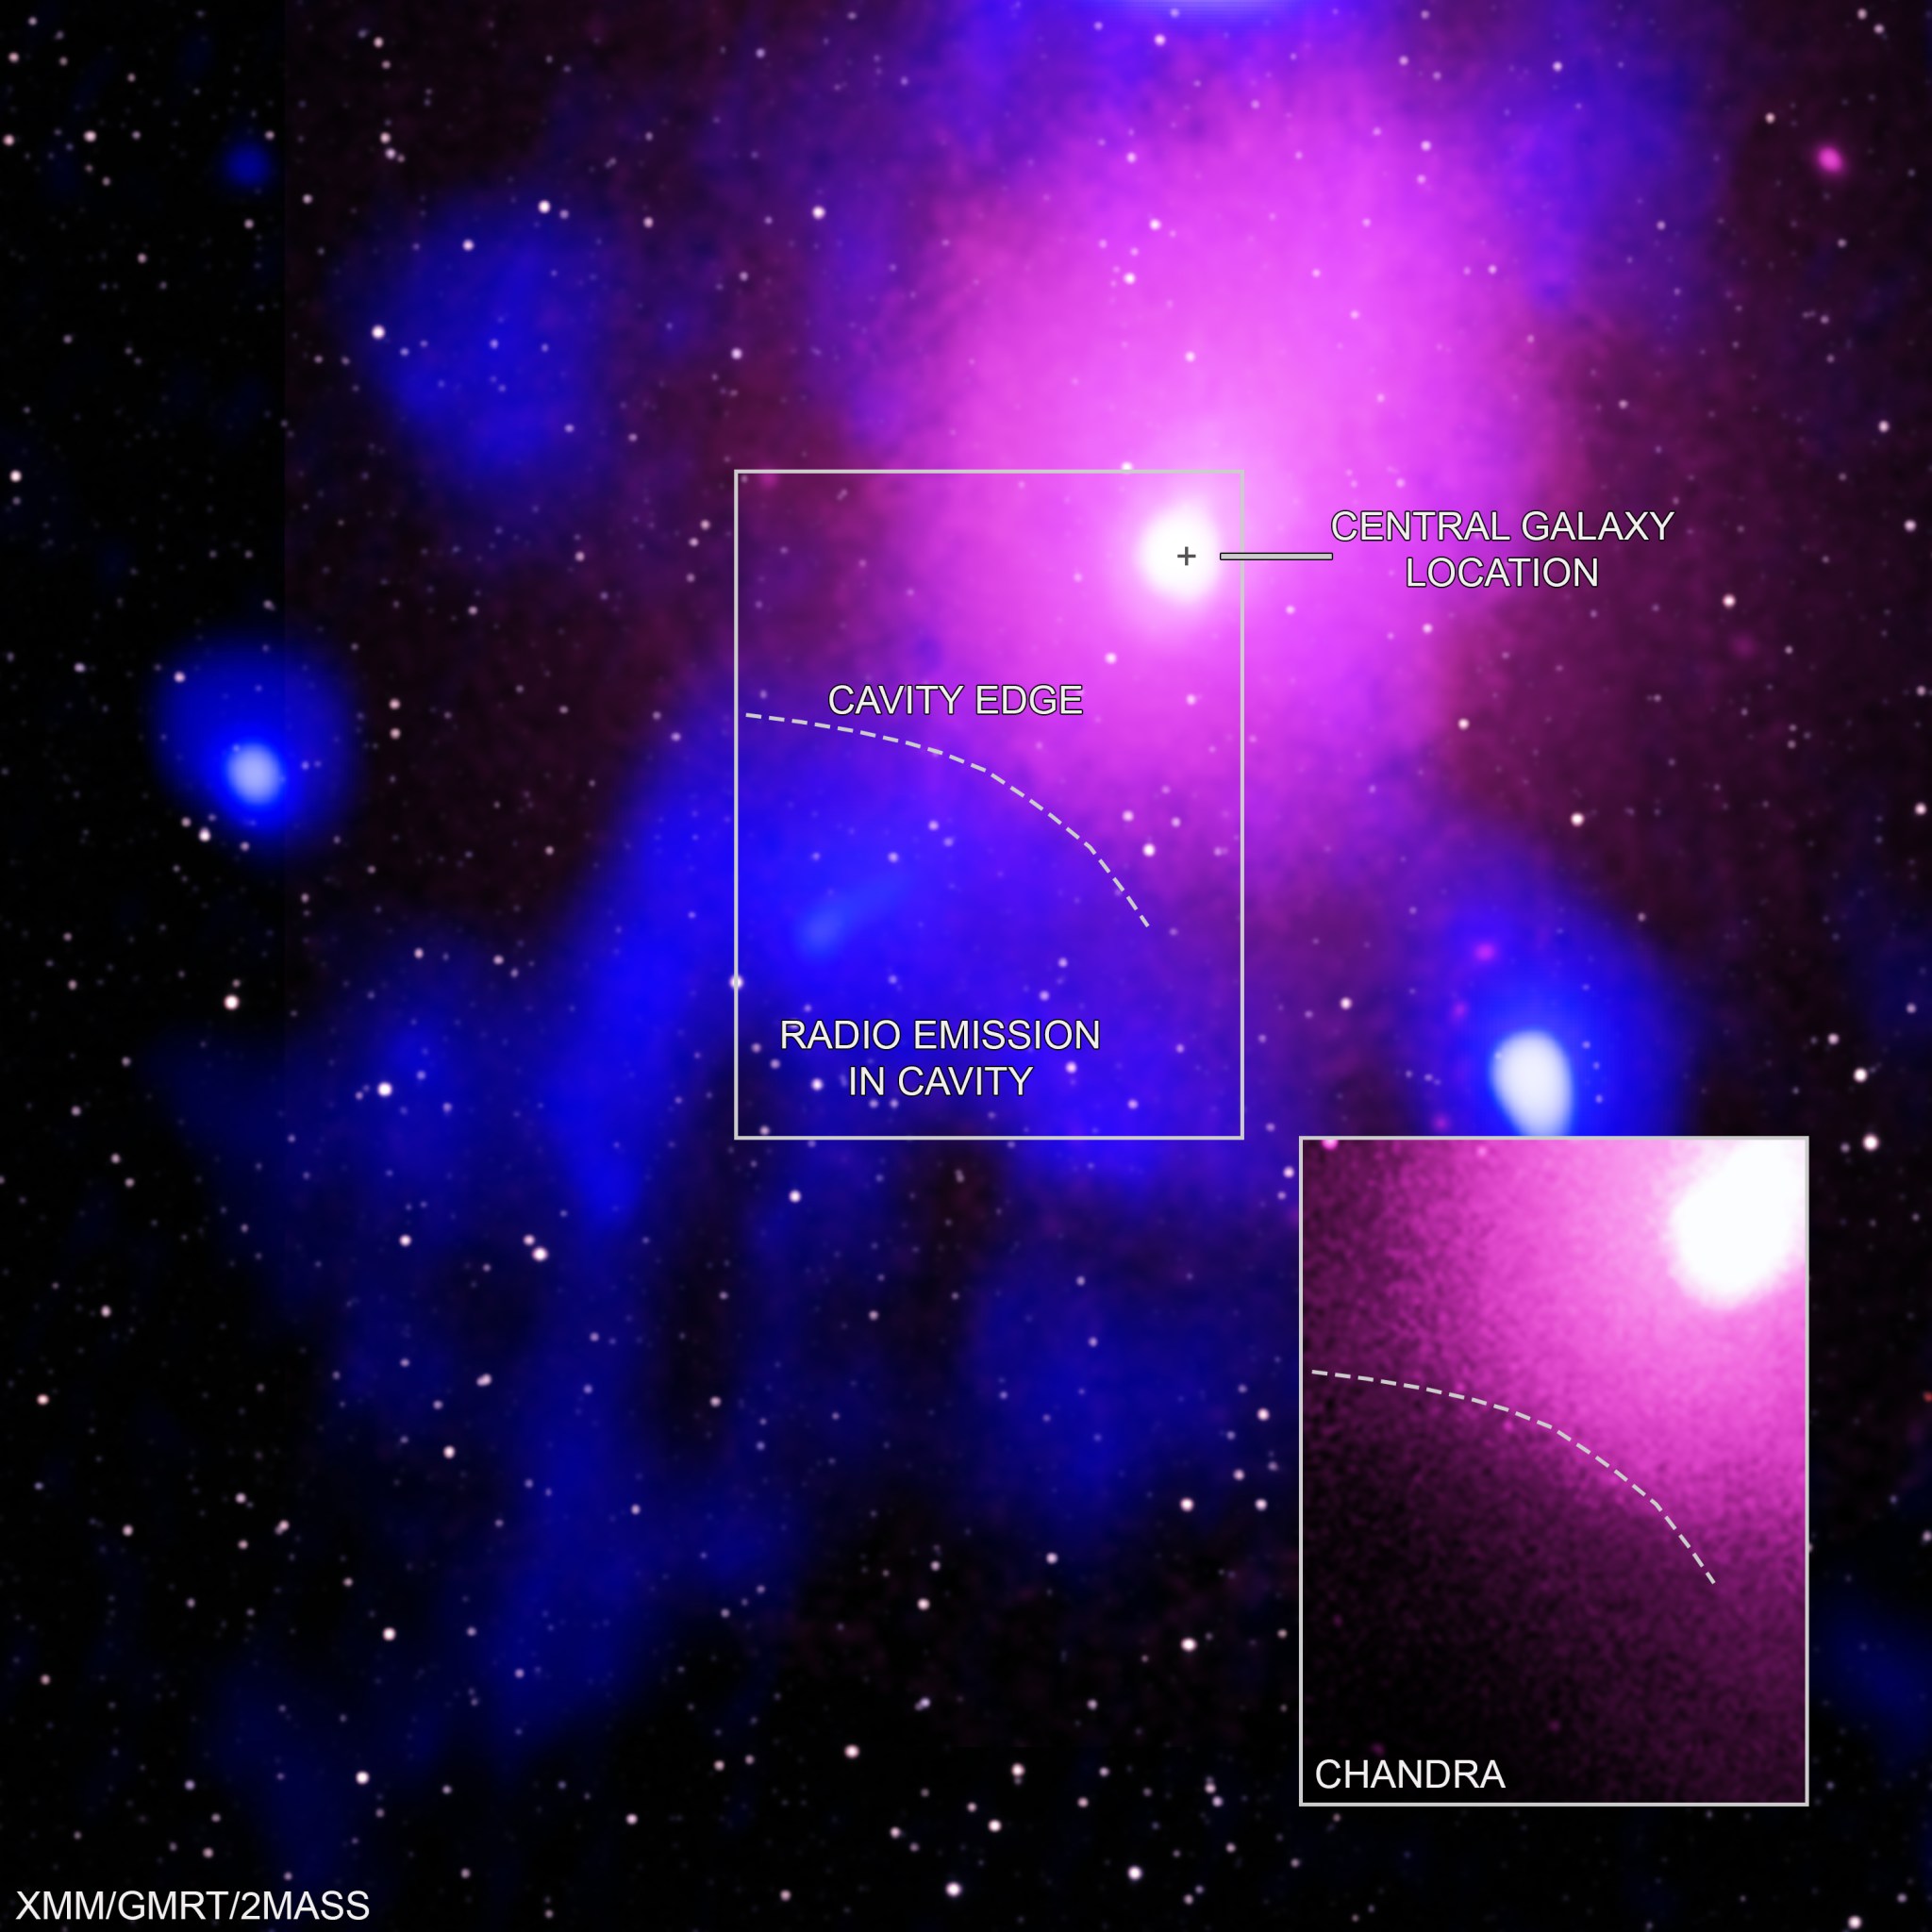 Evidence for the biggest explosion seen in the Universe comes from a combination of X-ray data from Chandra and XMM-Newton.